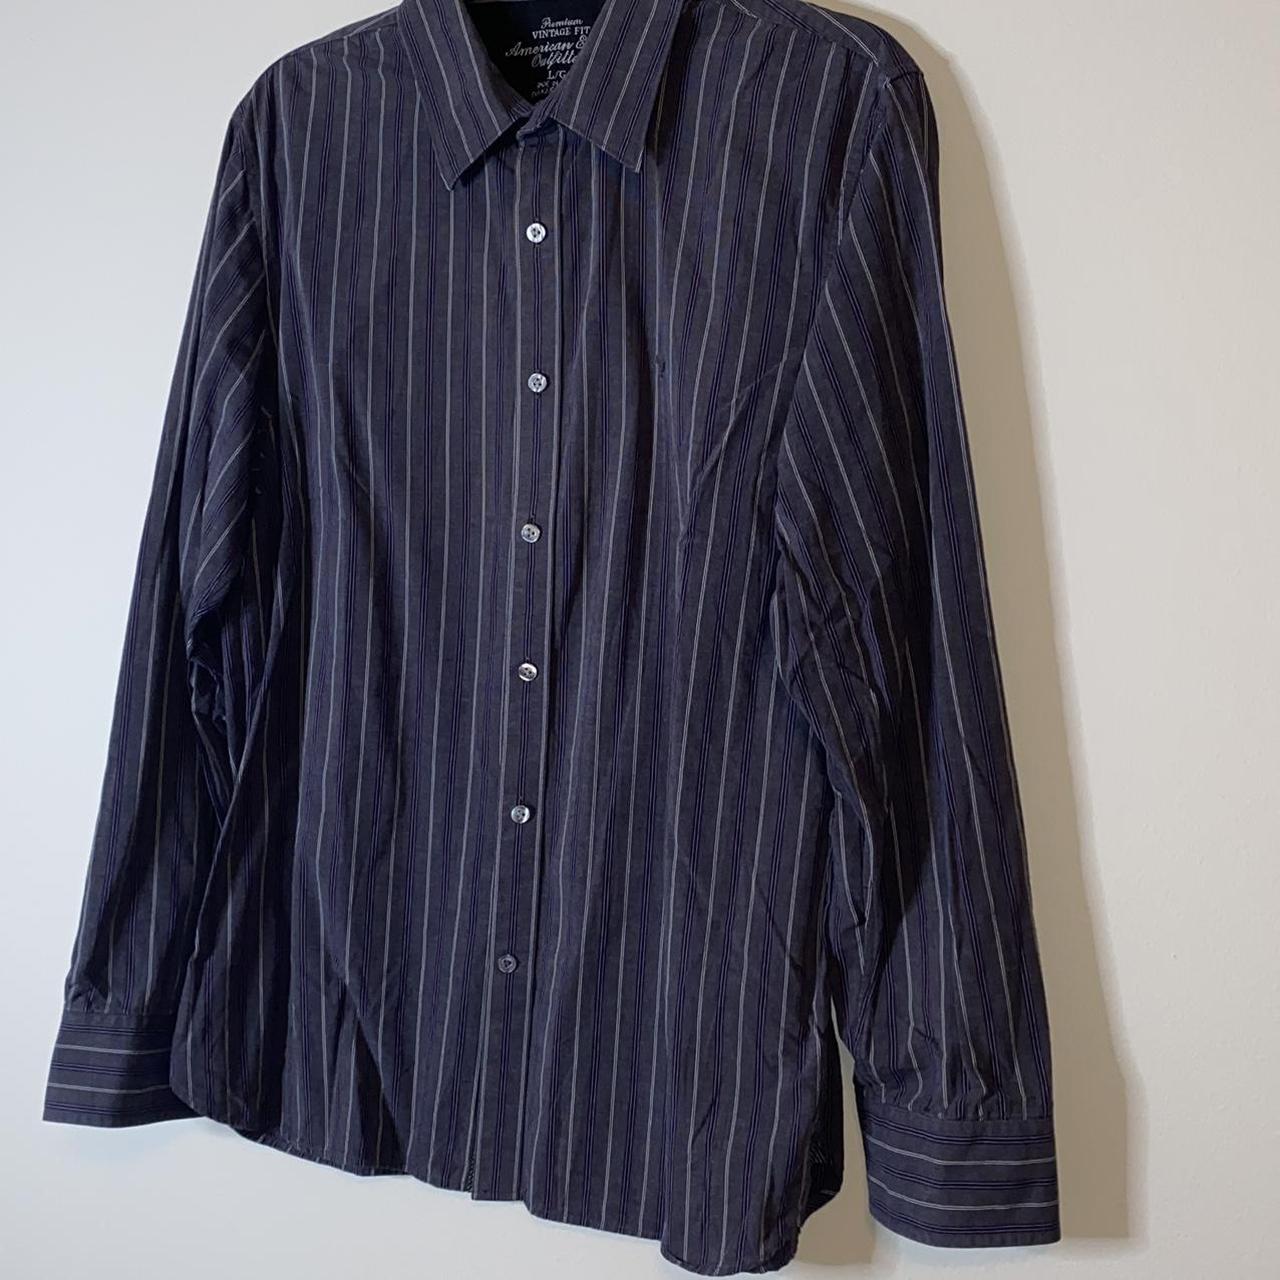 Product Image 4 - American Eagle Outfitters Men’s pinstripe